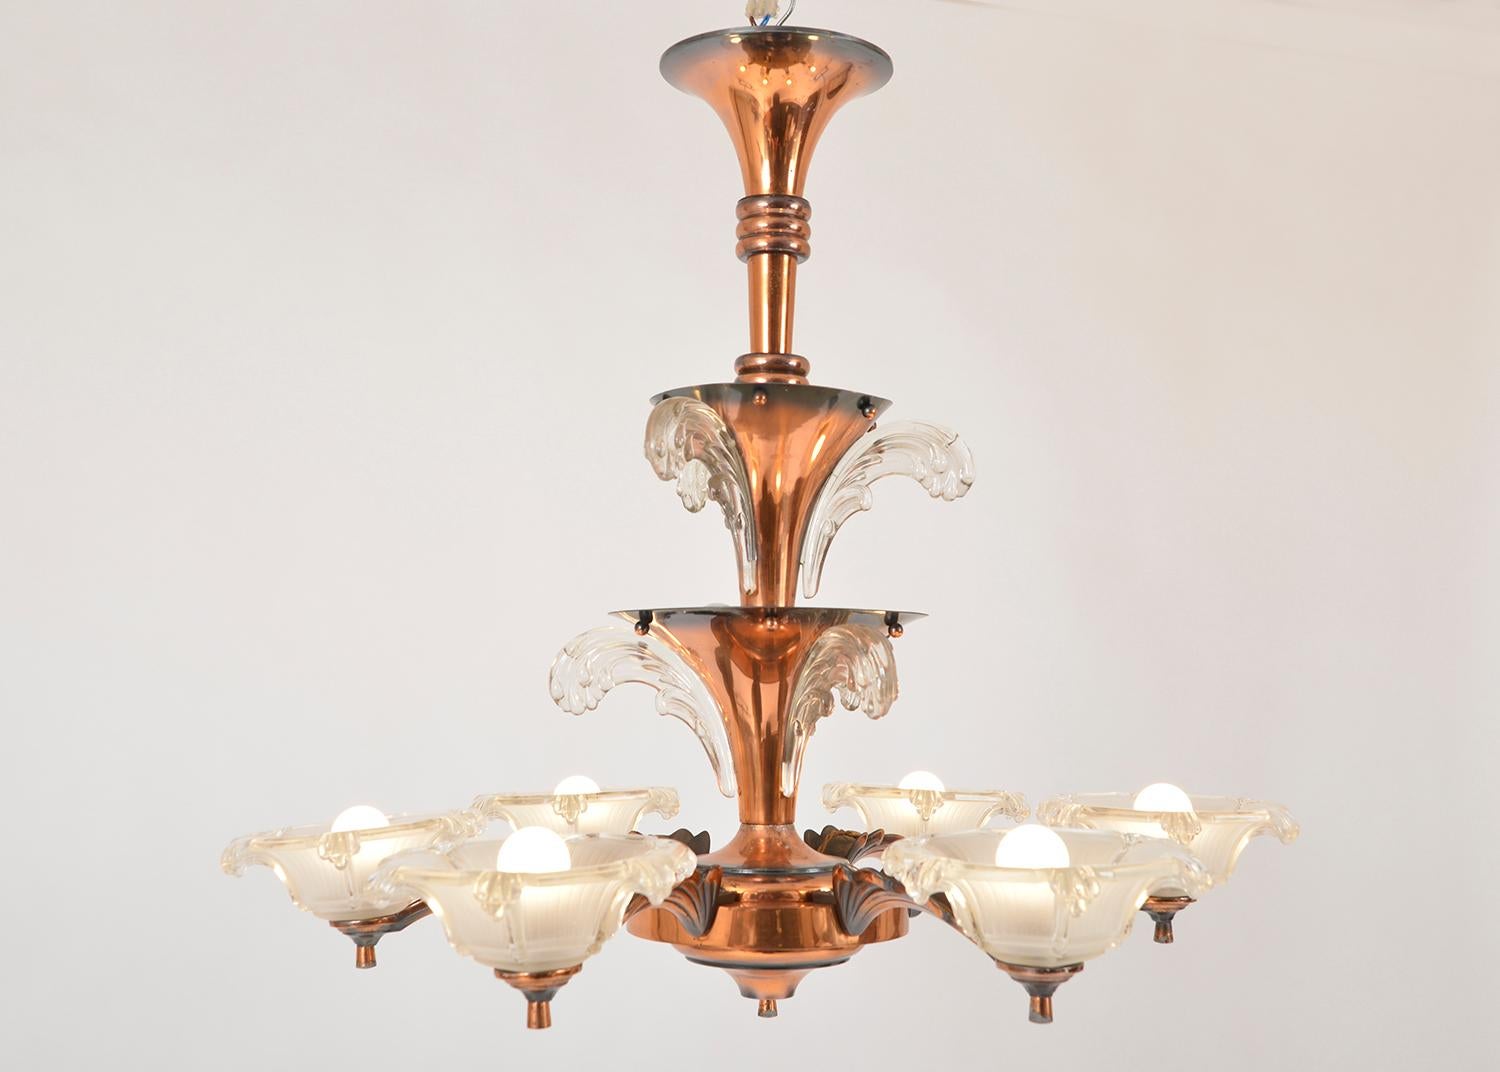 1930s French Art Deco 6-Arm Chandelier by Petitot and Ezan Copper and Glass For Sale 6